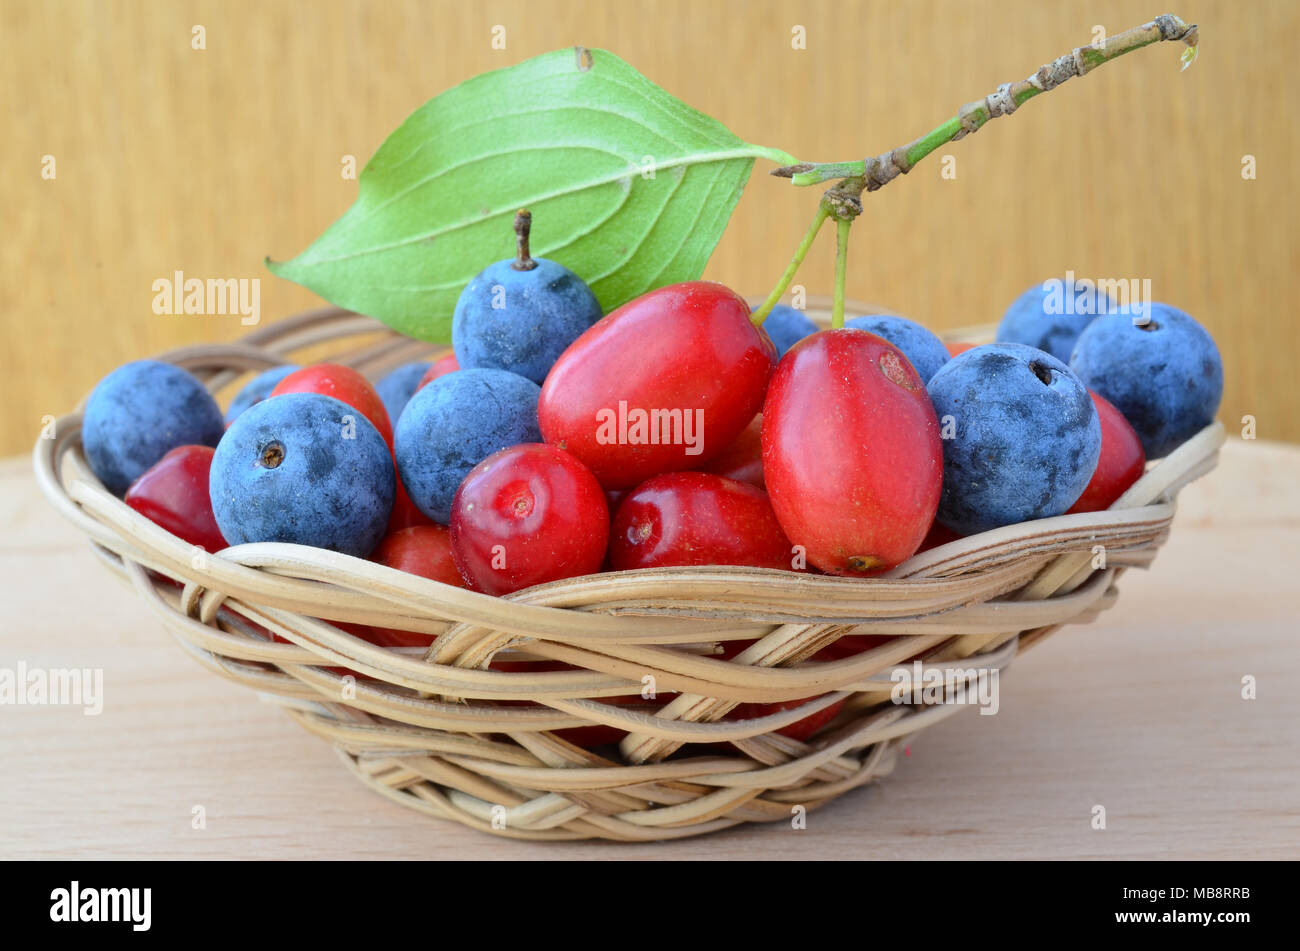 Mixed nutritive and curative, fresh and ripe Cornus mas and Blackthorn or Sloe berries in a wicker basket on wooden background, close up view Stock Photo